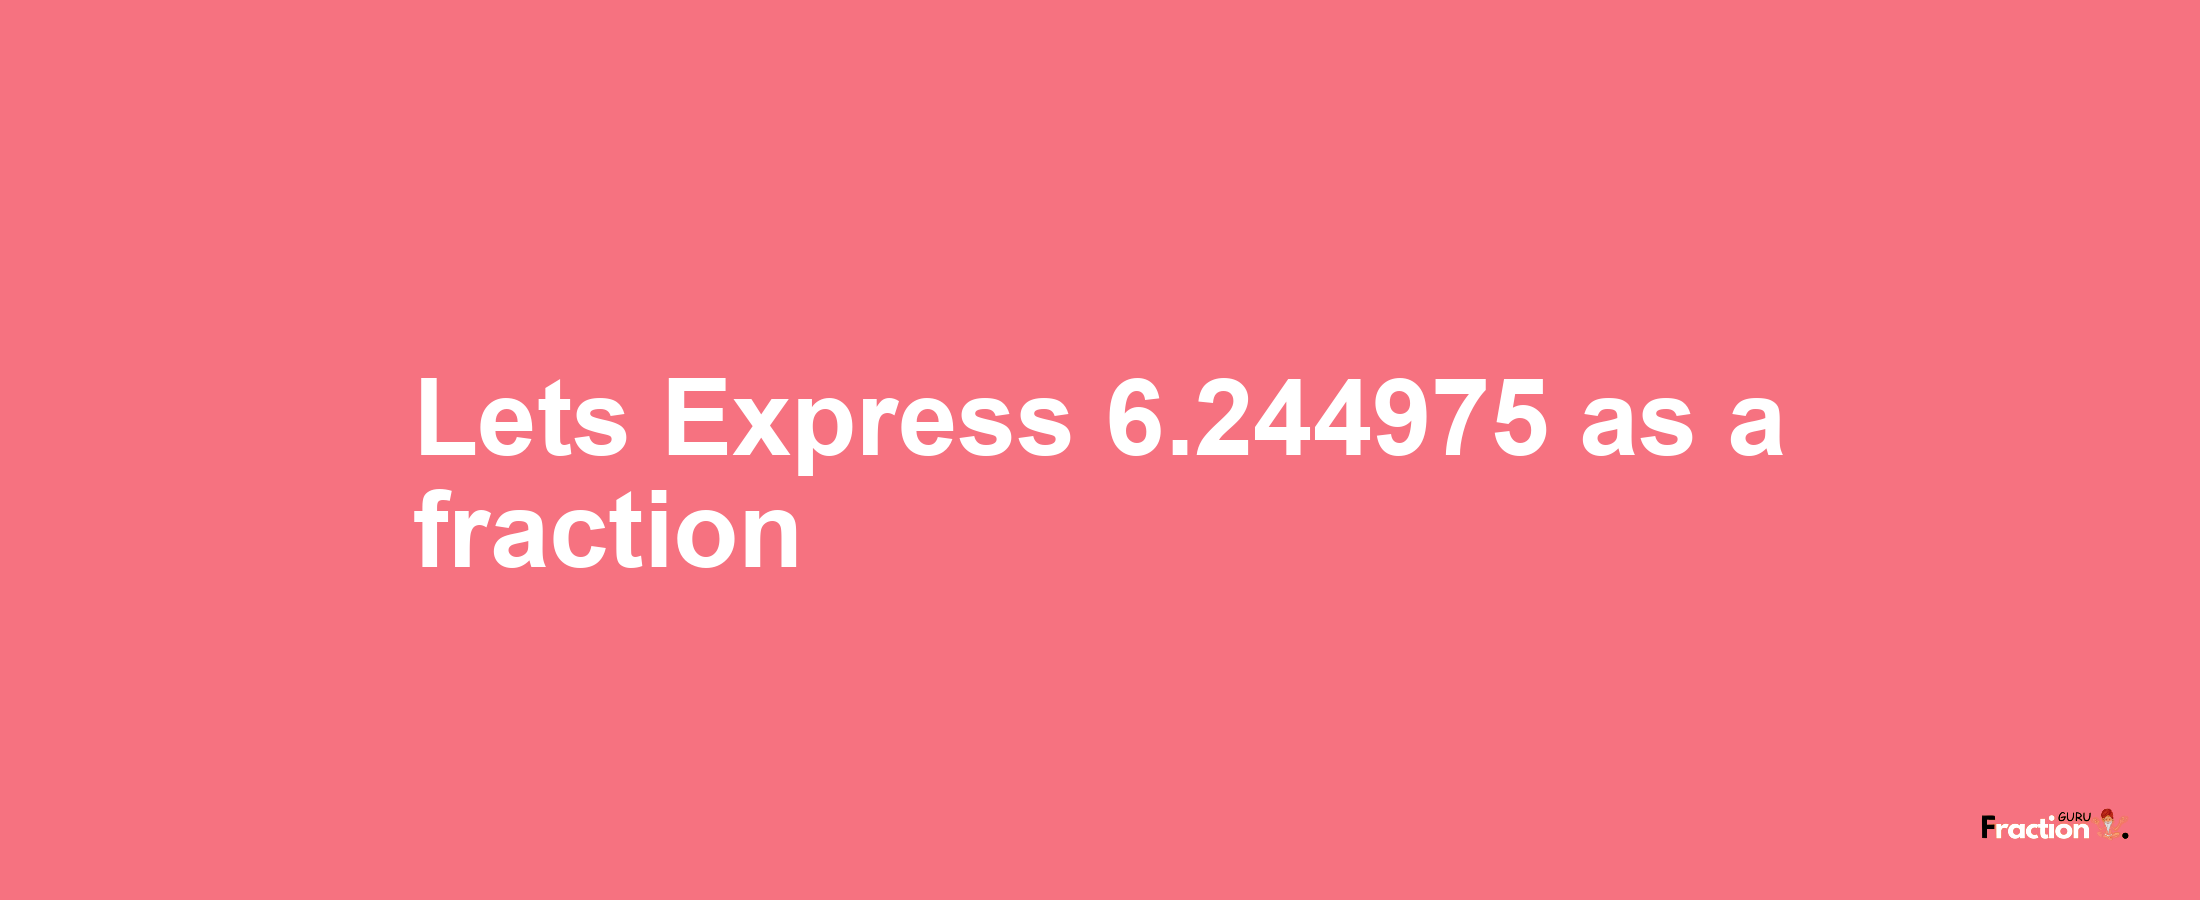 Lets Express 6.244975 as afraction